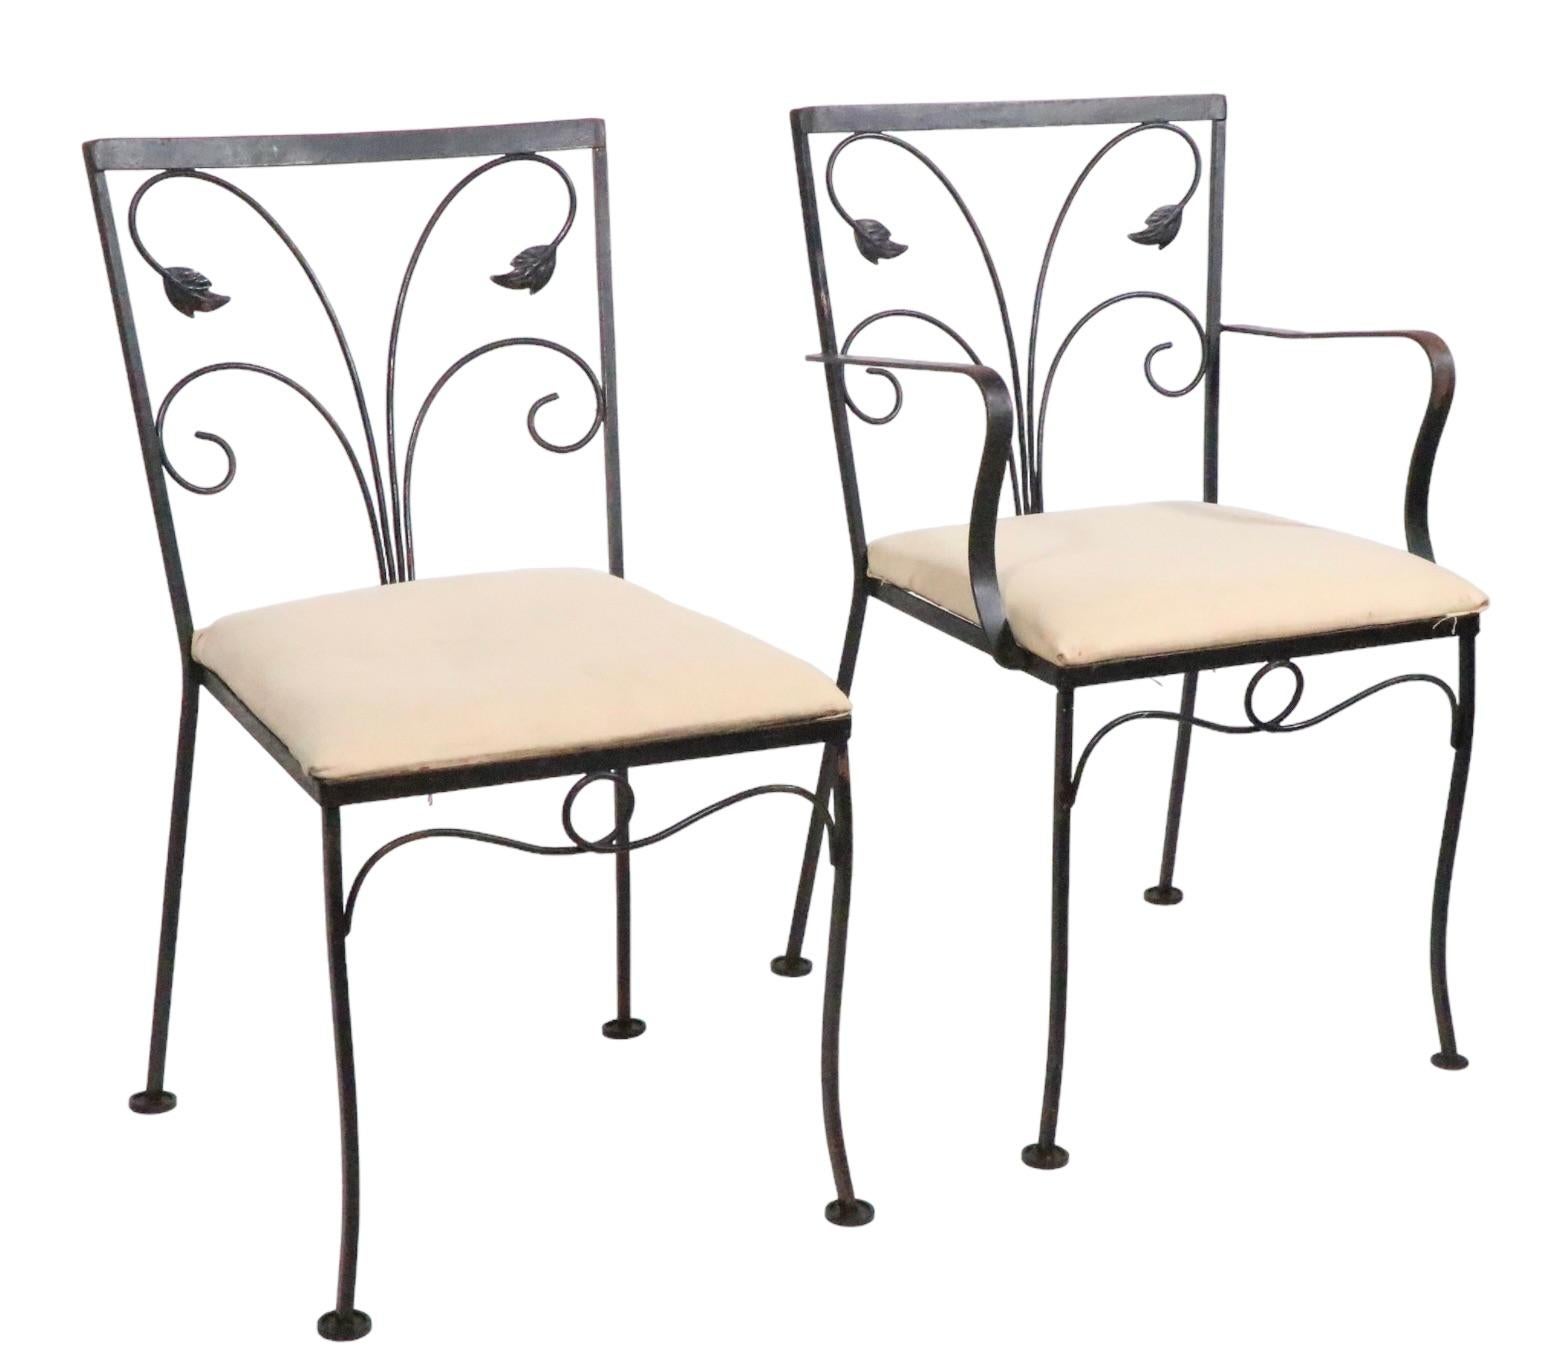 5pc. Wrought Iron and Glass Garden Patio Set att. to Salterini For Sale 10